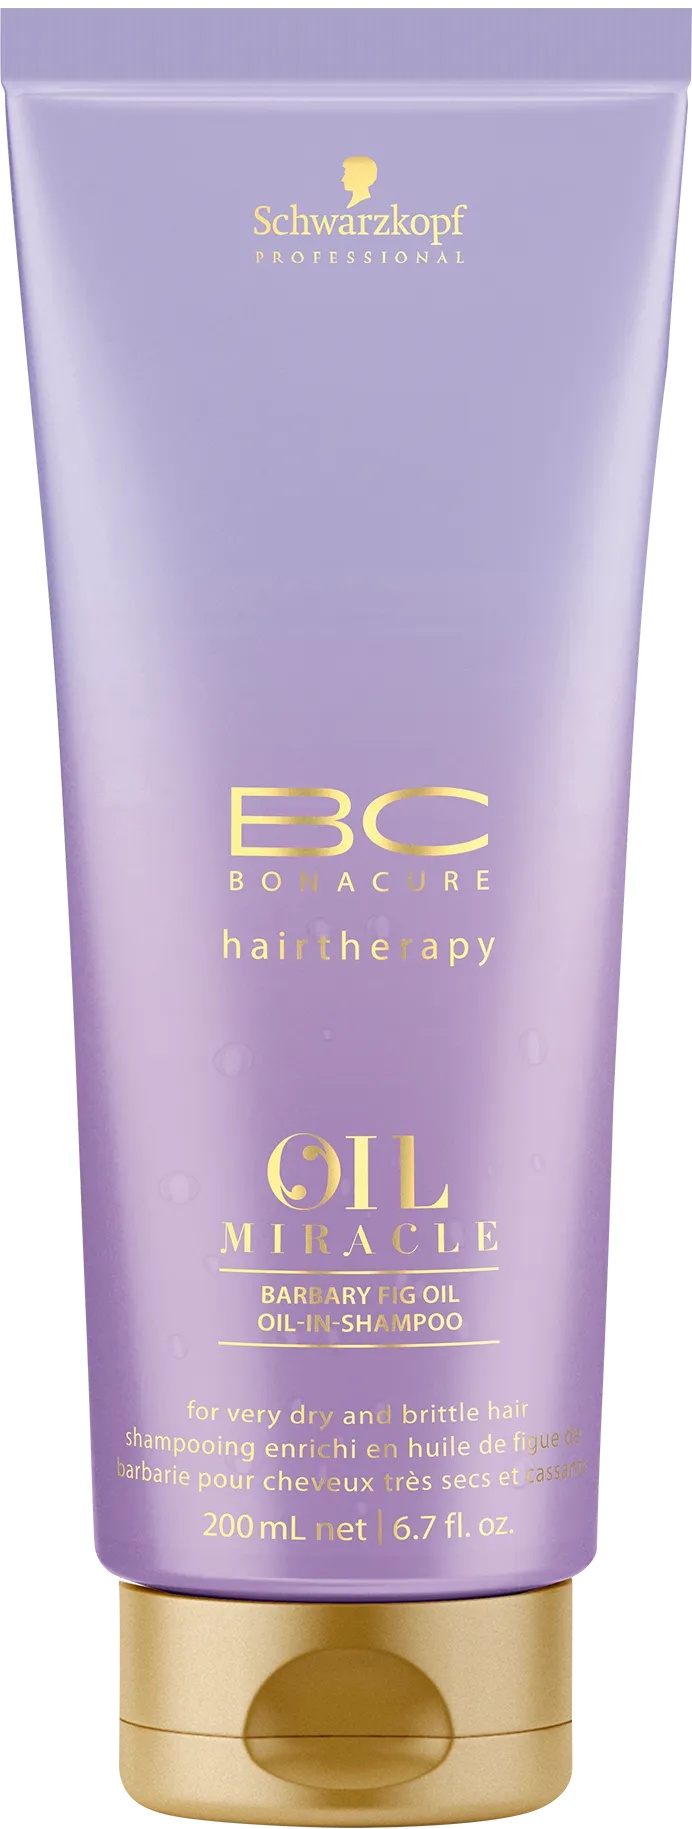 Schwarzkopf Professional BC Bonacure Oil Miracle Barbary Fig Oil Oil-in-Shampoo